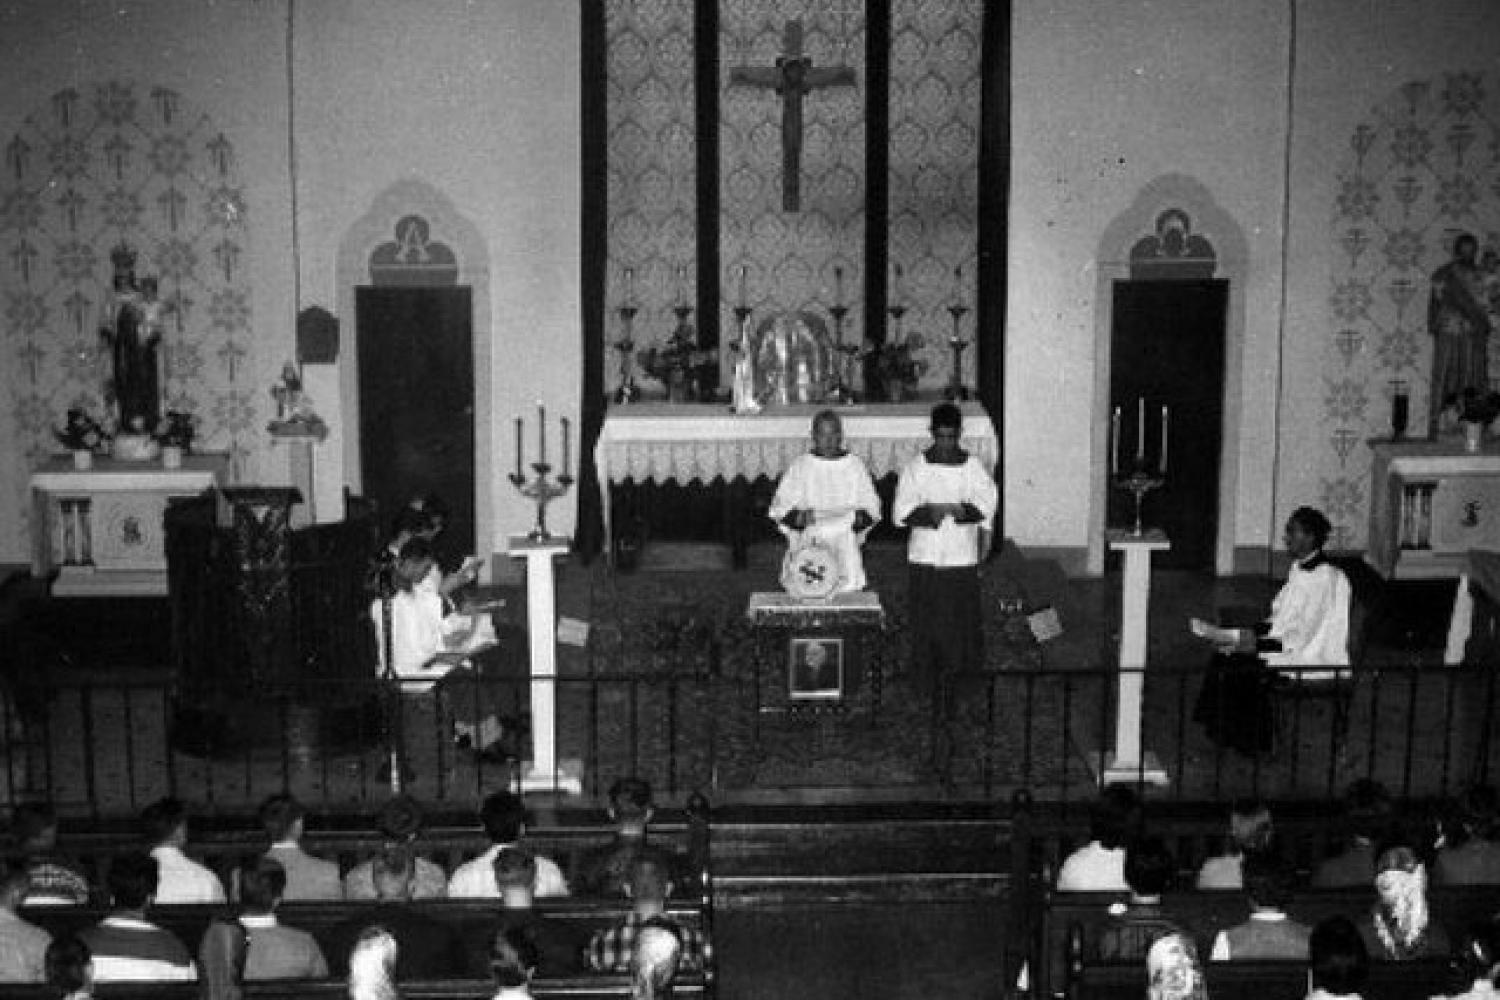 Interior of Old St. Mary's, 1958